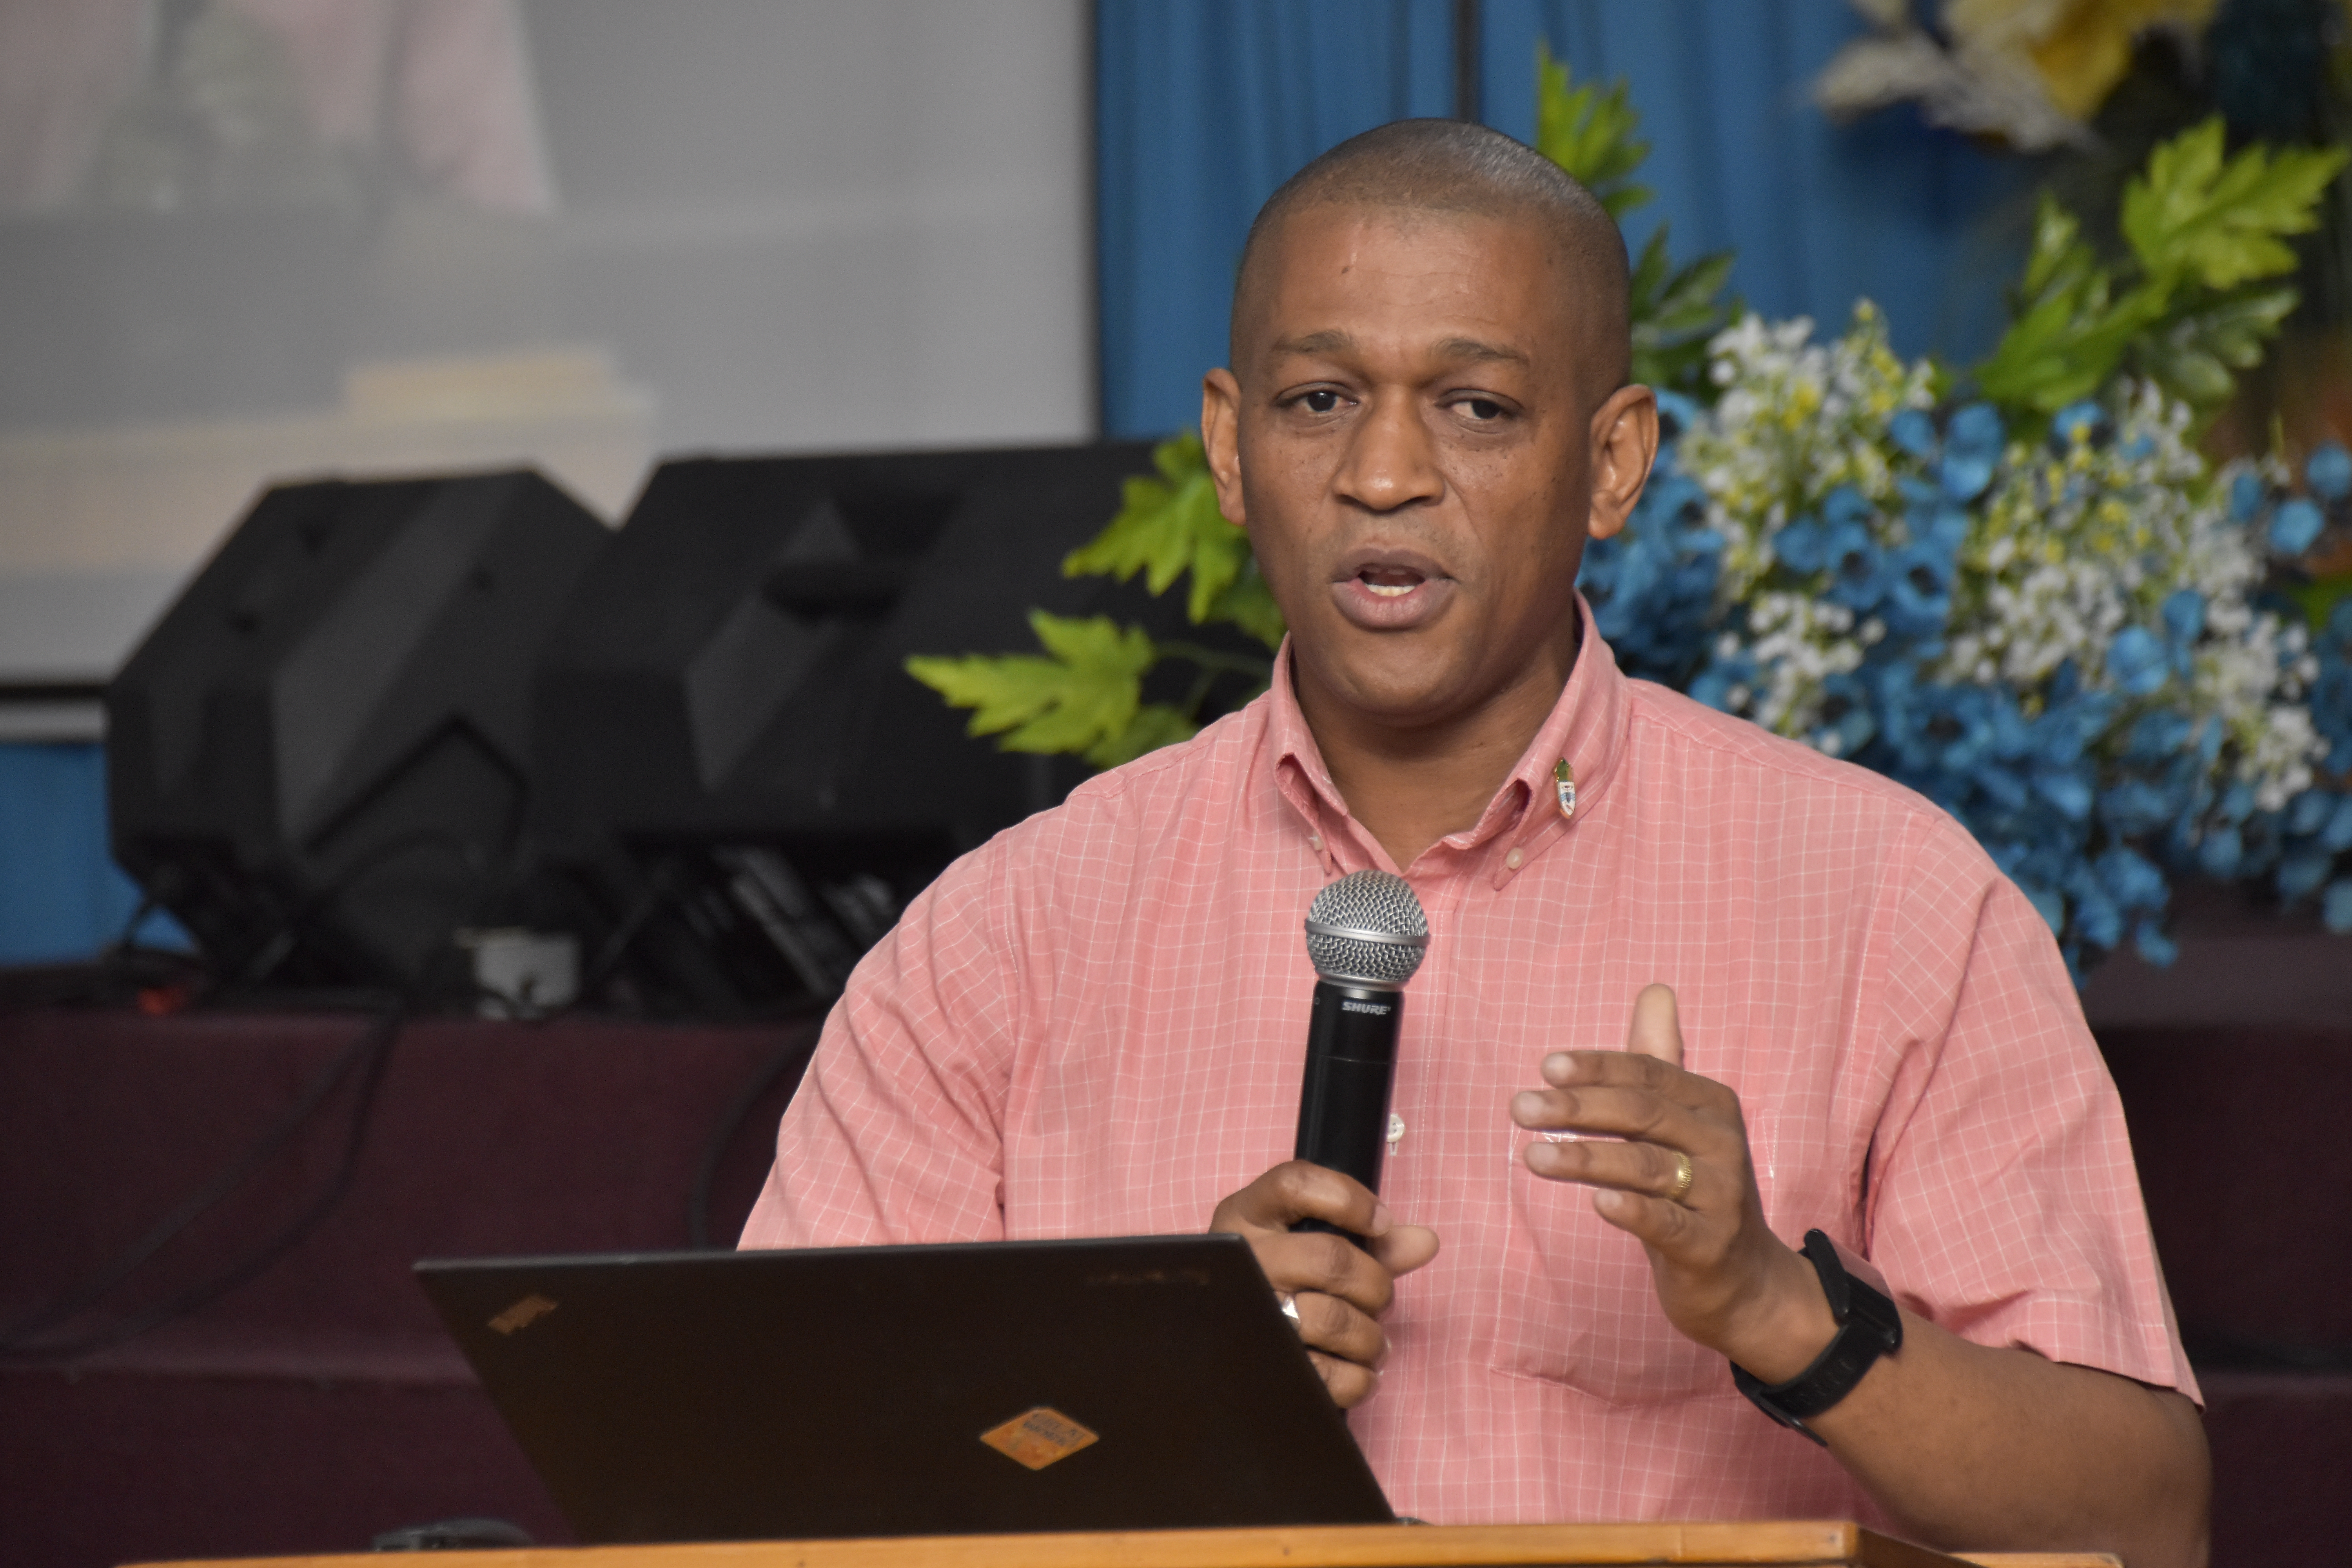 Director, Department of Energy, Dr. Mark Bynoe, gestures as he makes a point during his presentation at the Vreed-en-Hoop Wesleyan Church.